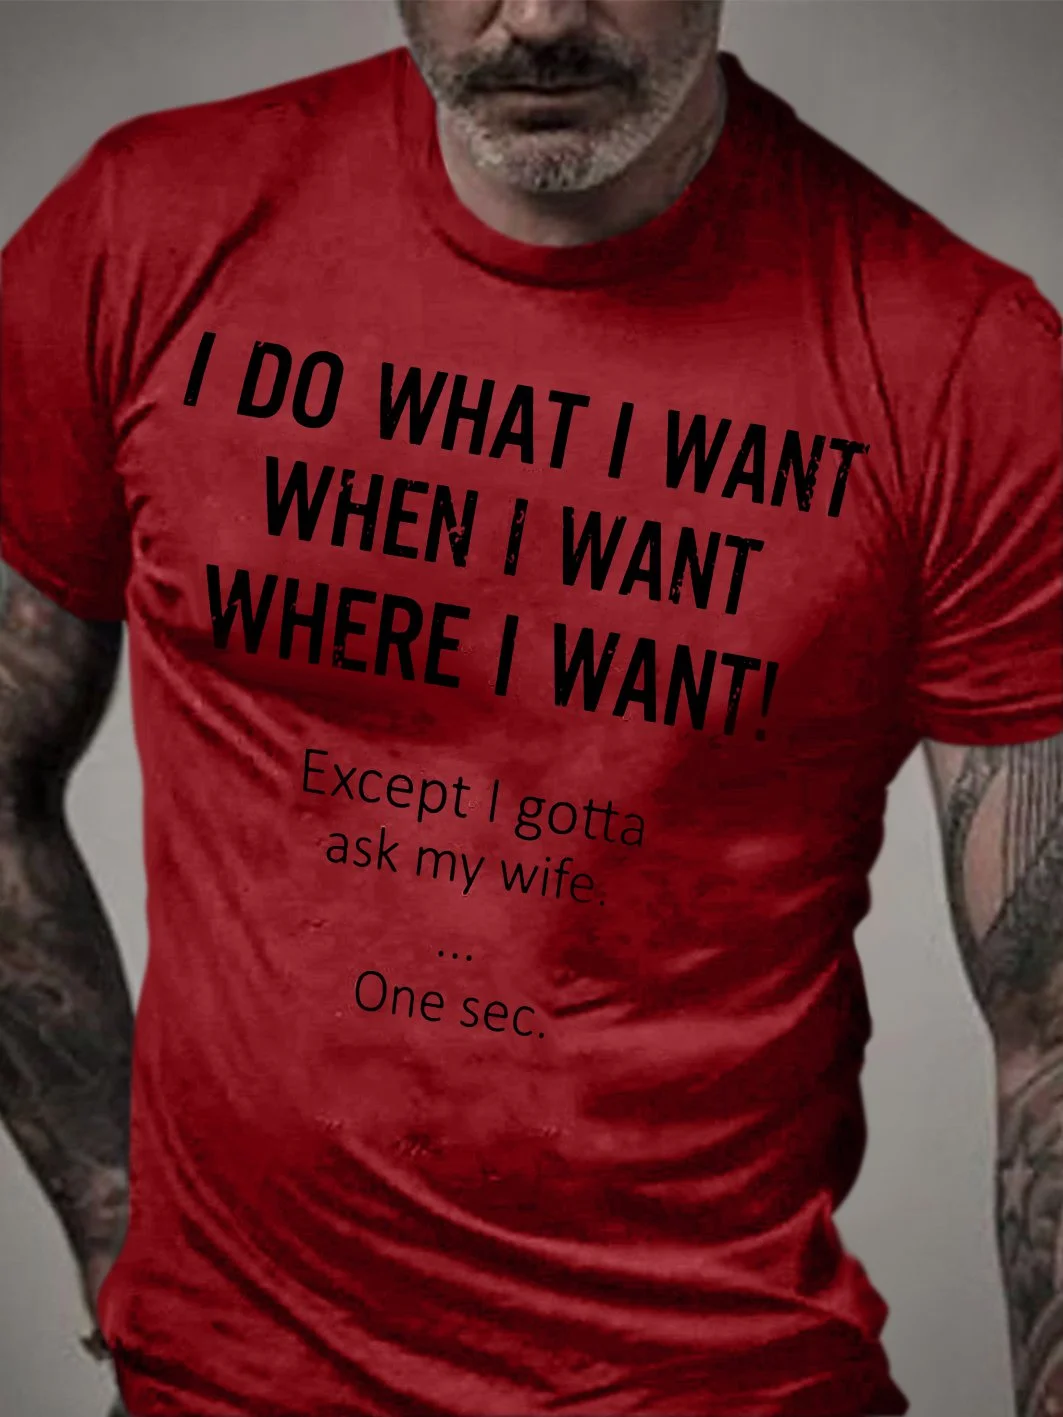 I Do What I Want When I Want Where I Want Except I Gotta Ask My Wife One Sec Shirt